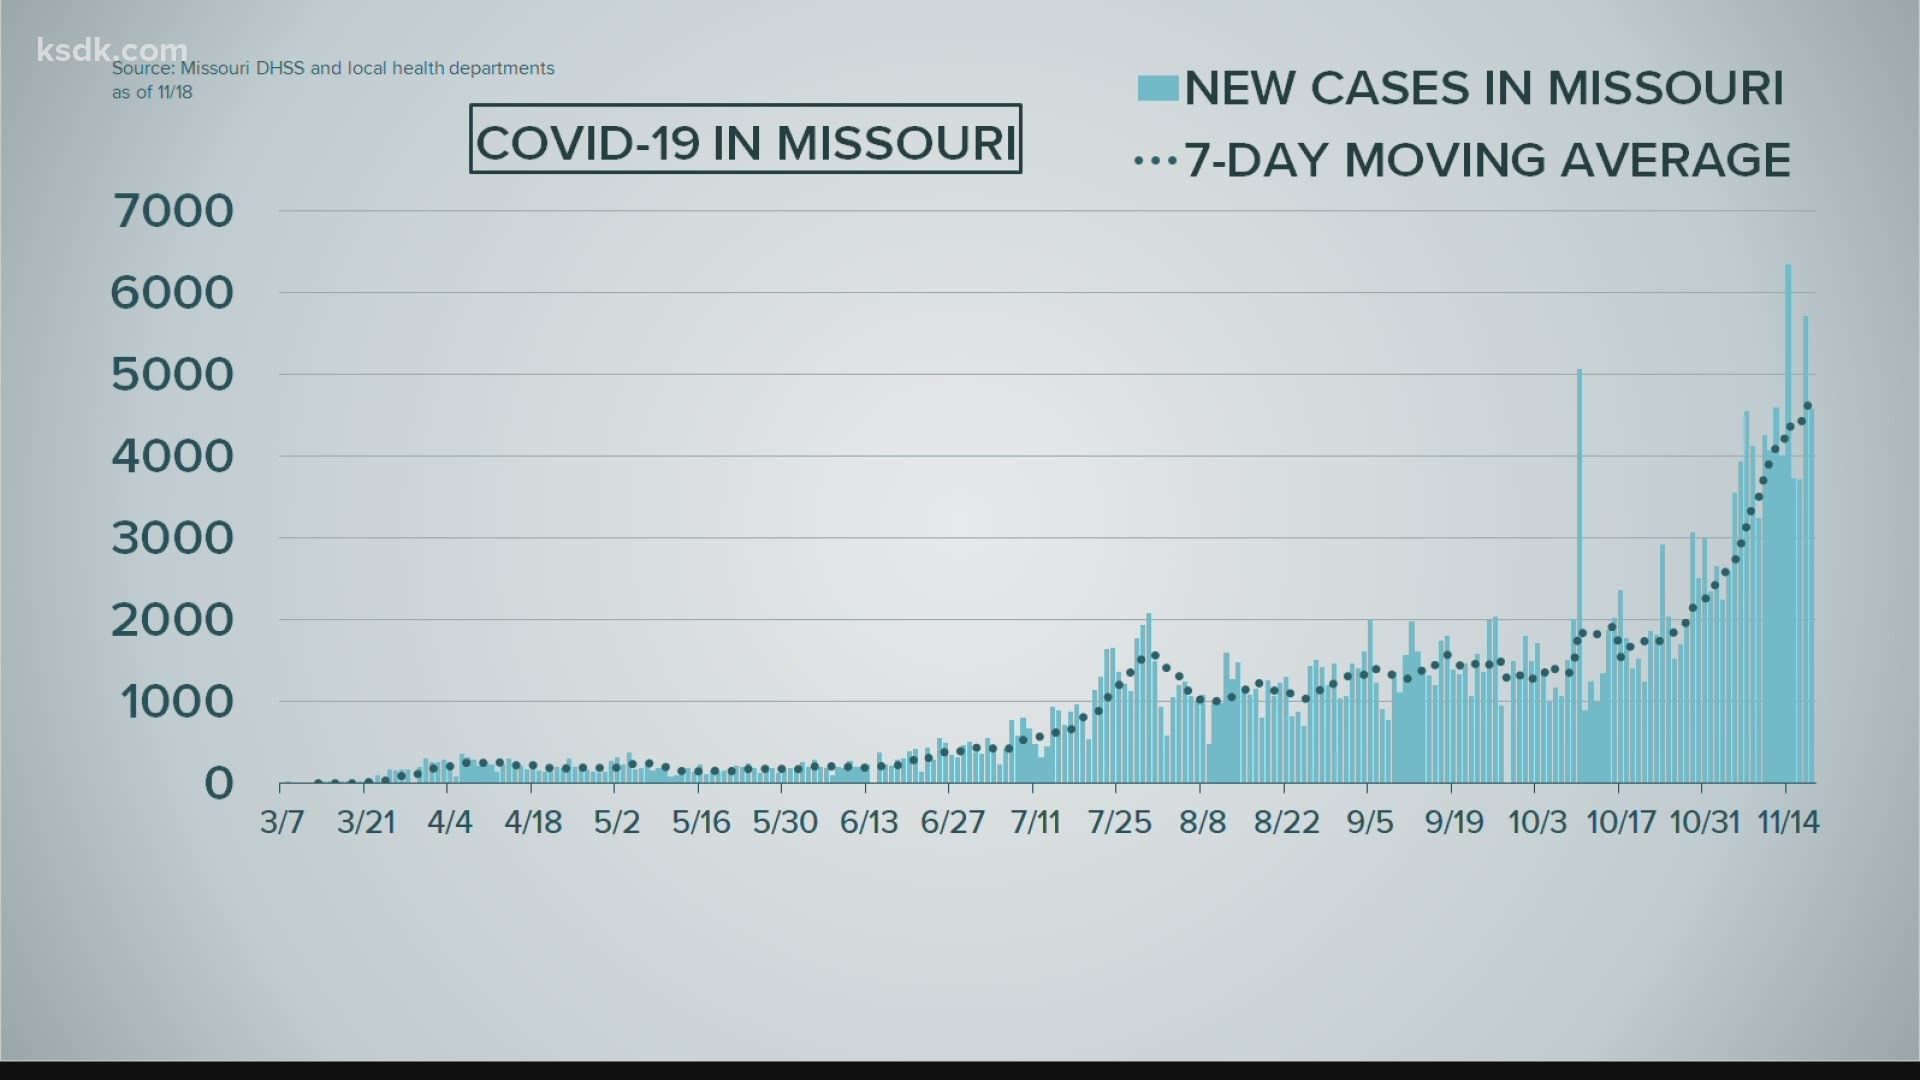 This comes just after the all-time high of 6,346 cases was set on Saturday